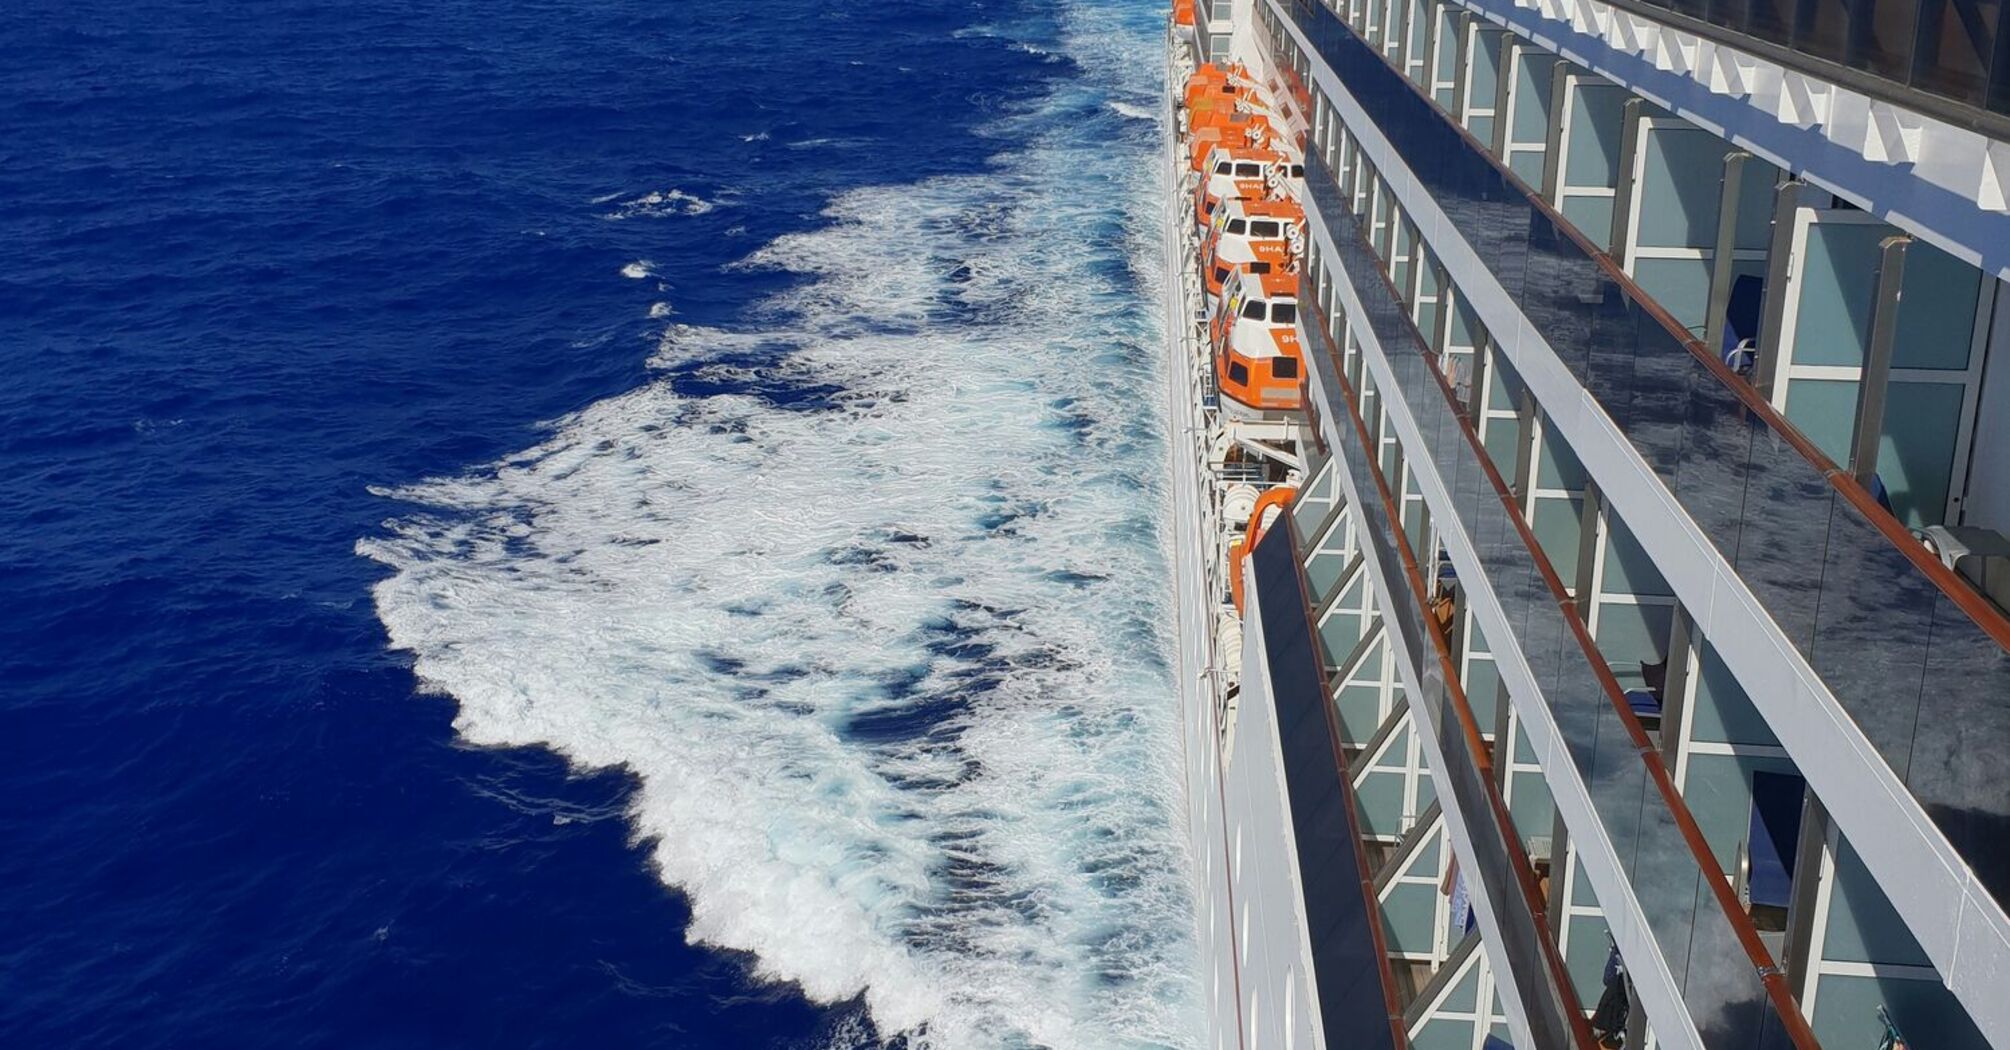 An unusual life hack for a cruise trip that will make life easier